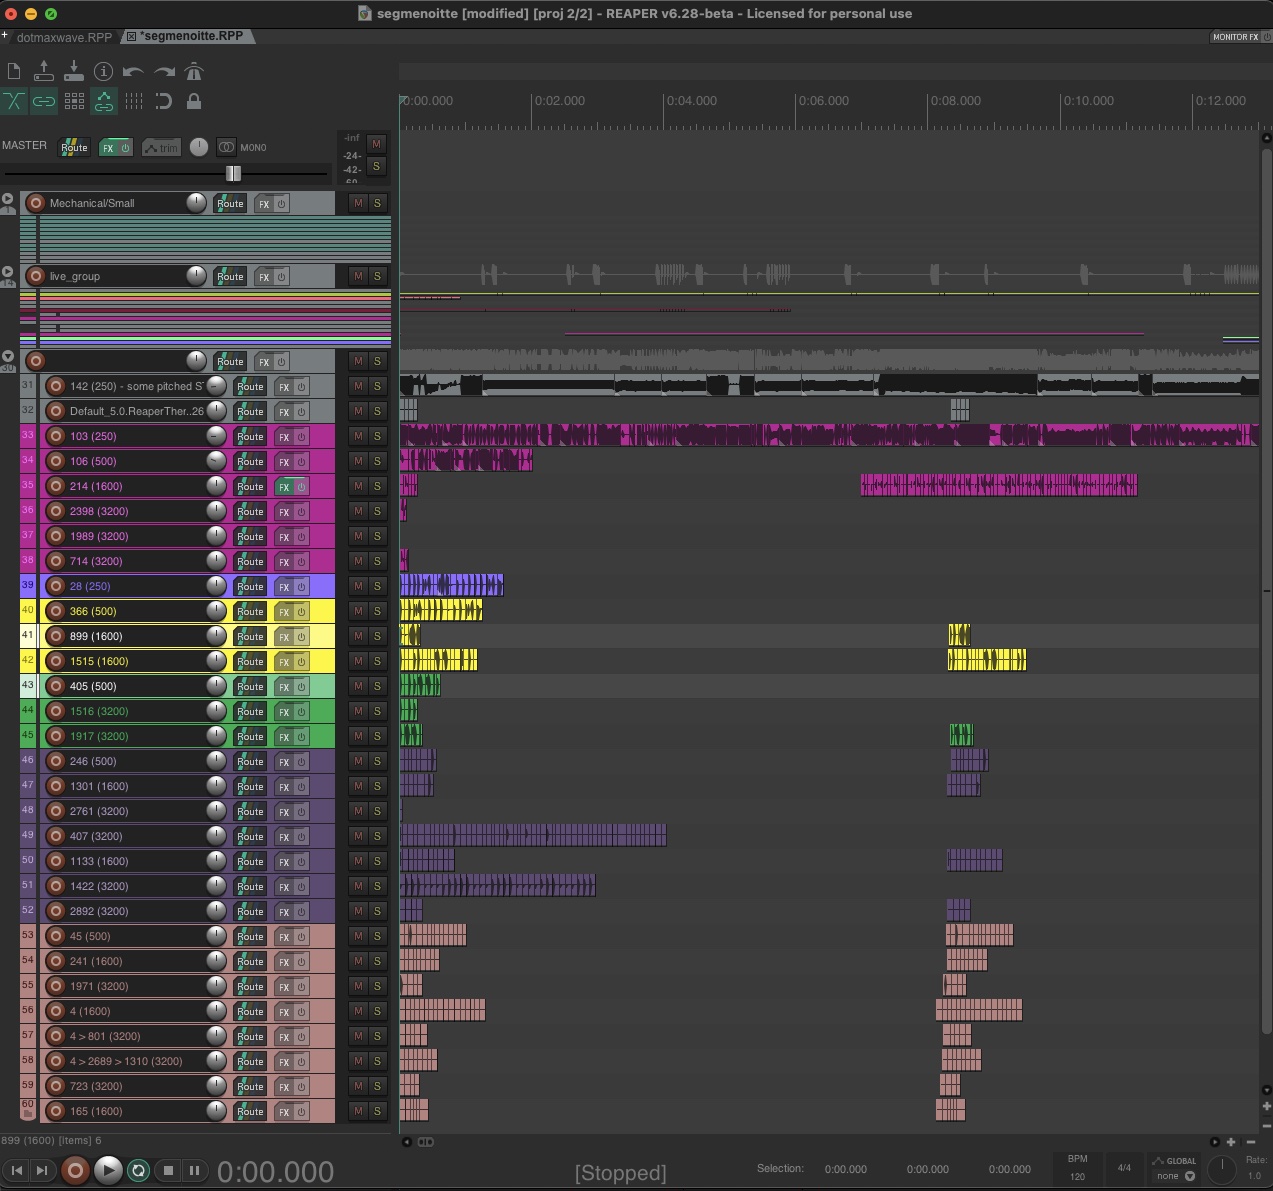 REAPER session for segmnoittet. Tracks displayed on the left side of the screen contain various tracks of clusters and their respective "sub-clusters".